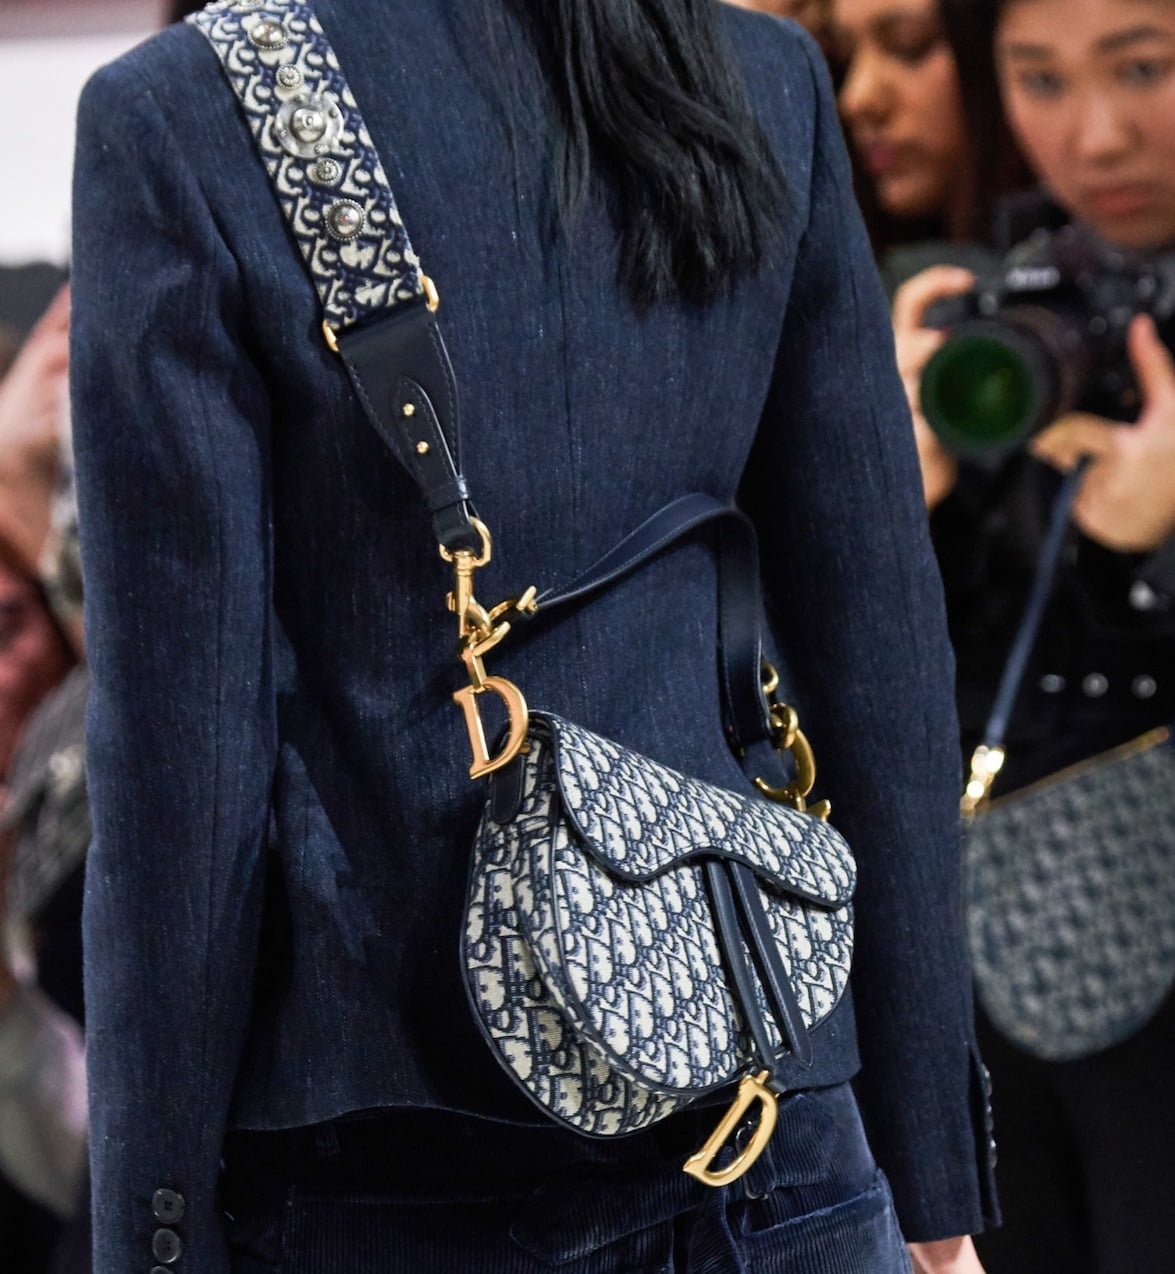 Dior Continues with Saddles, Book Totes, Logos and More for Fall